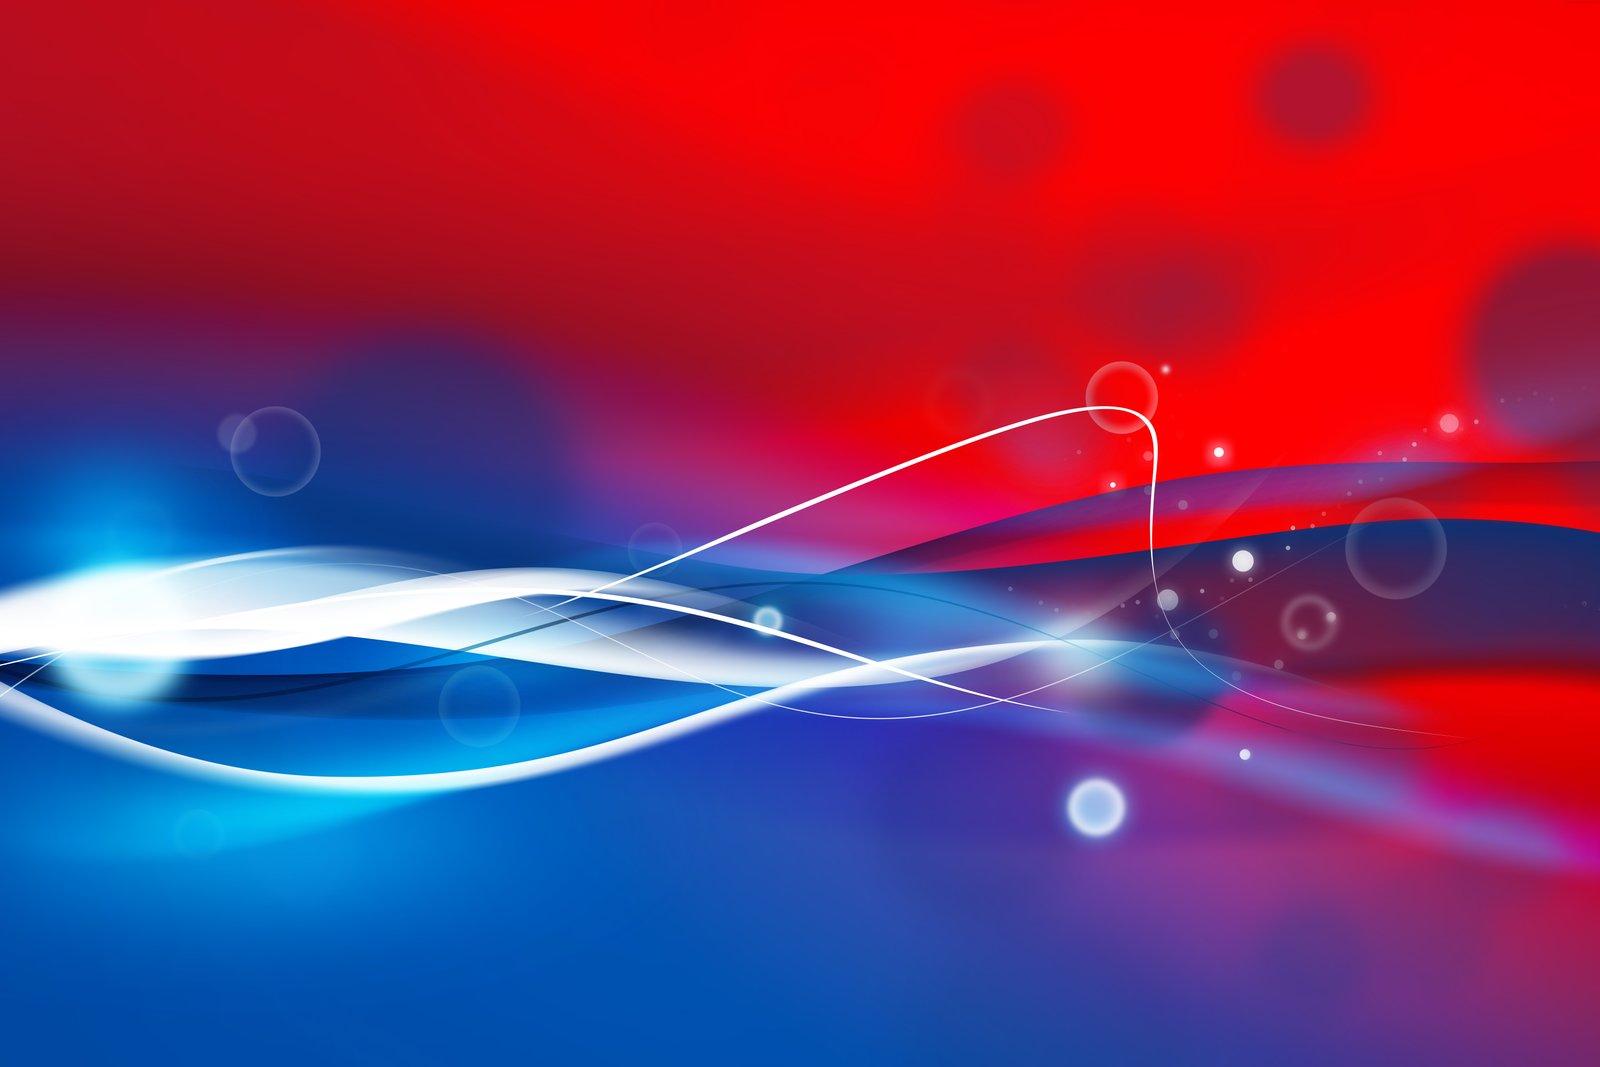 Abstract red and blue background - PSDgraphics